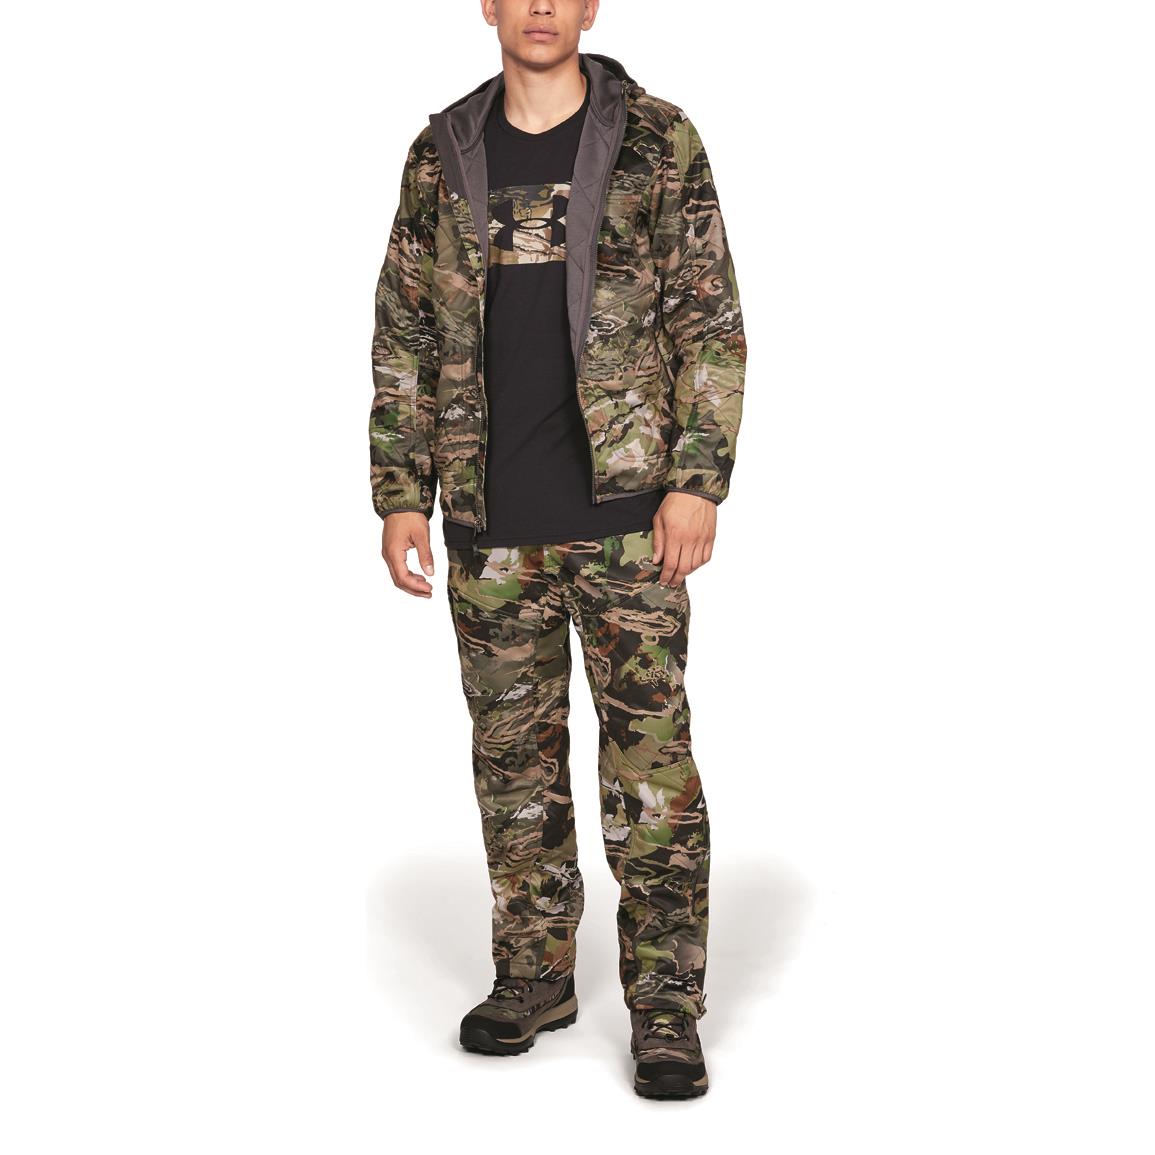 under armour ridge reaper forest jacket